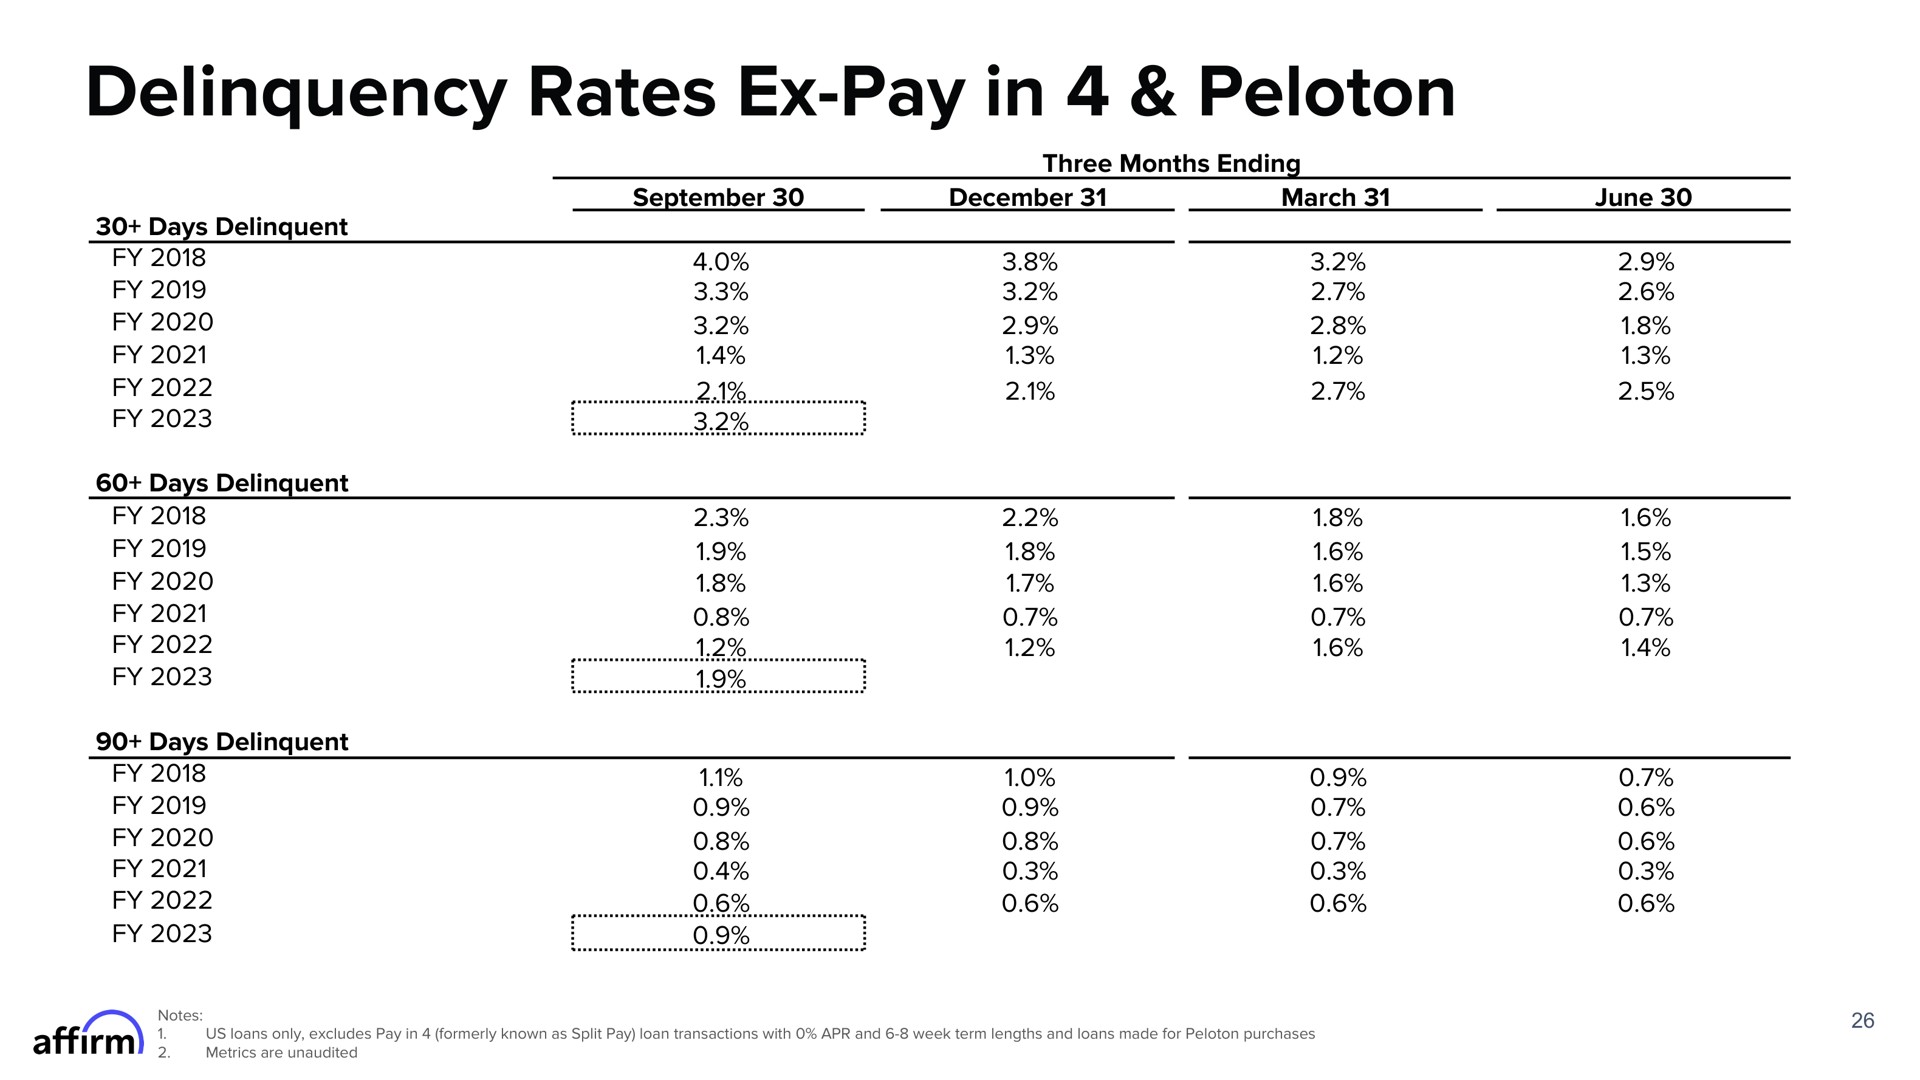 delinquency rates pay in peloton petite men | Affirm